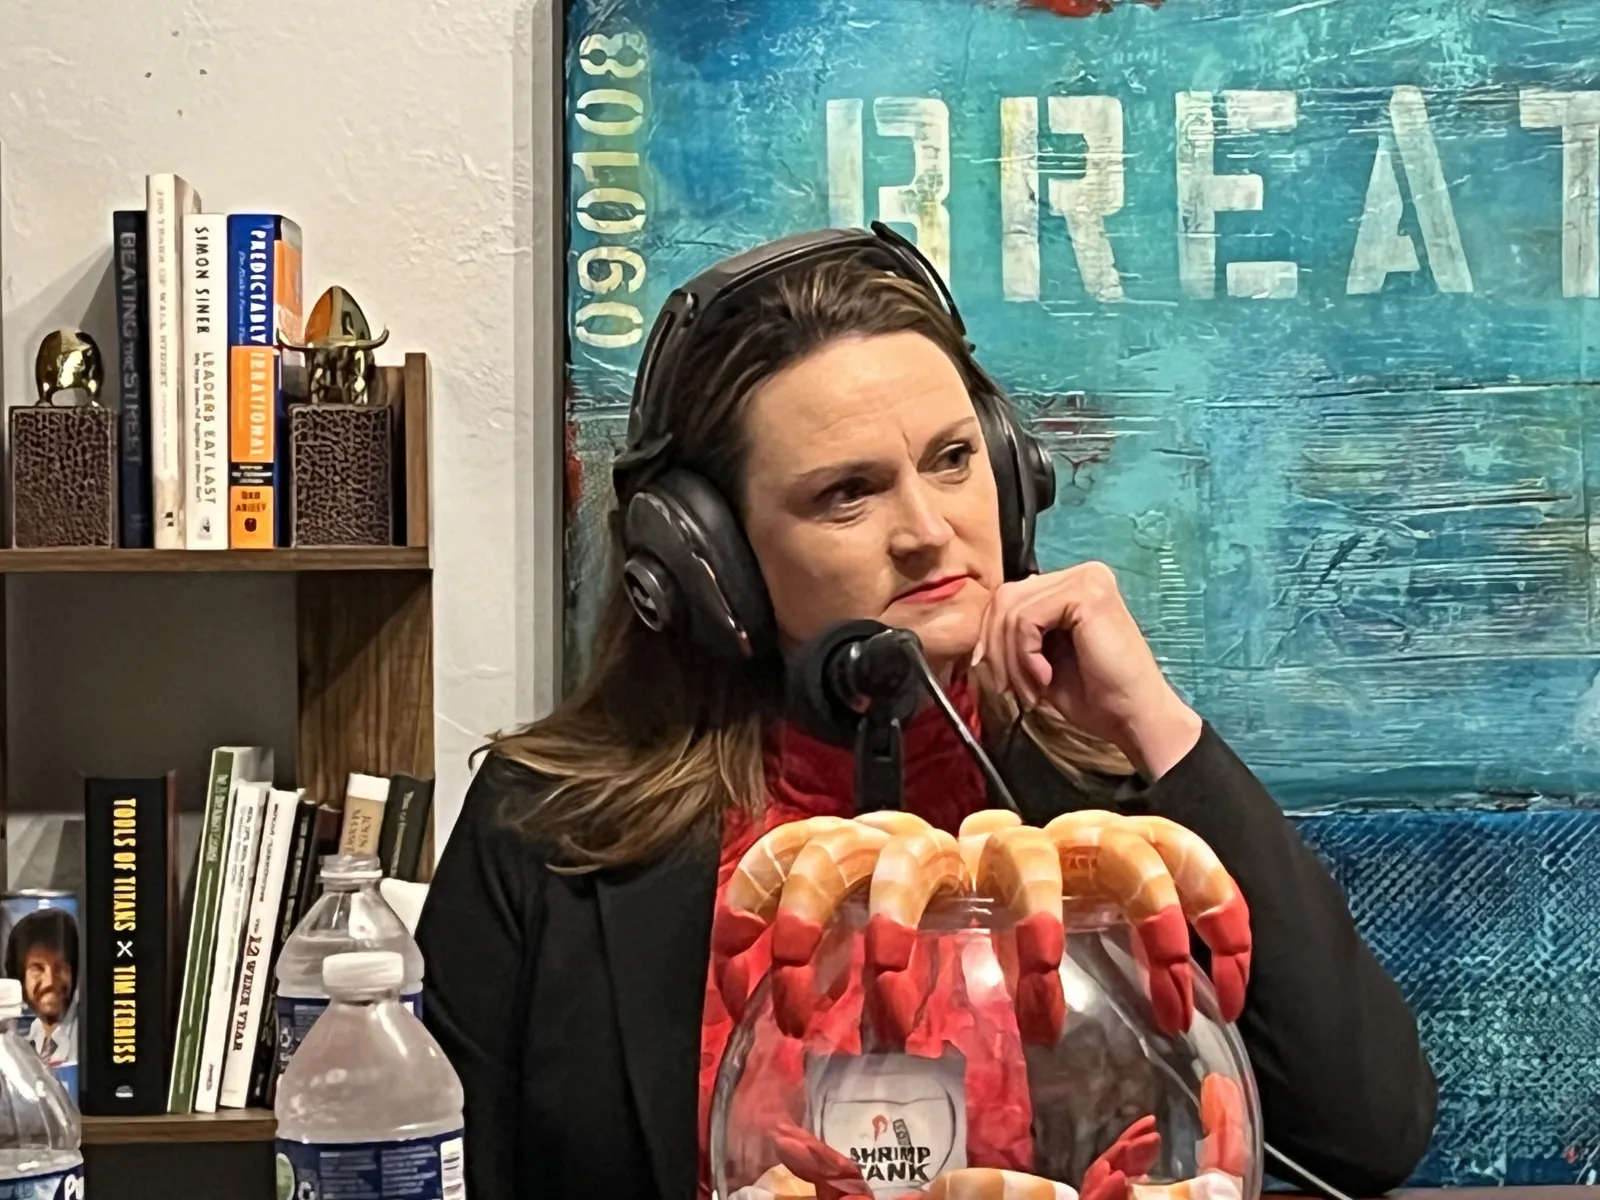 a woman wearing headphones and holding a bag of candy